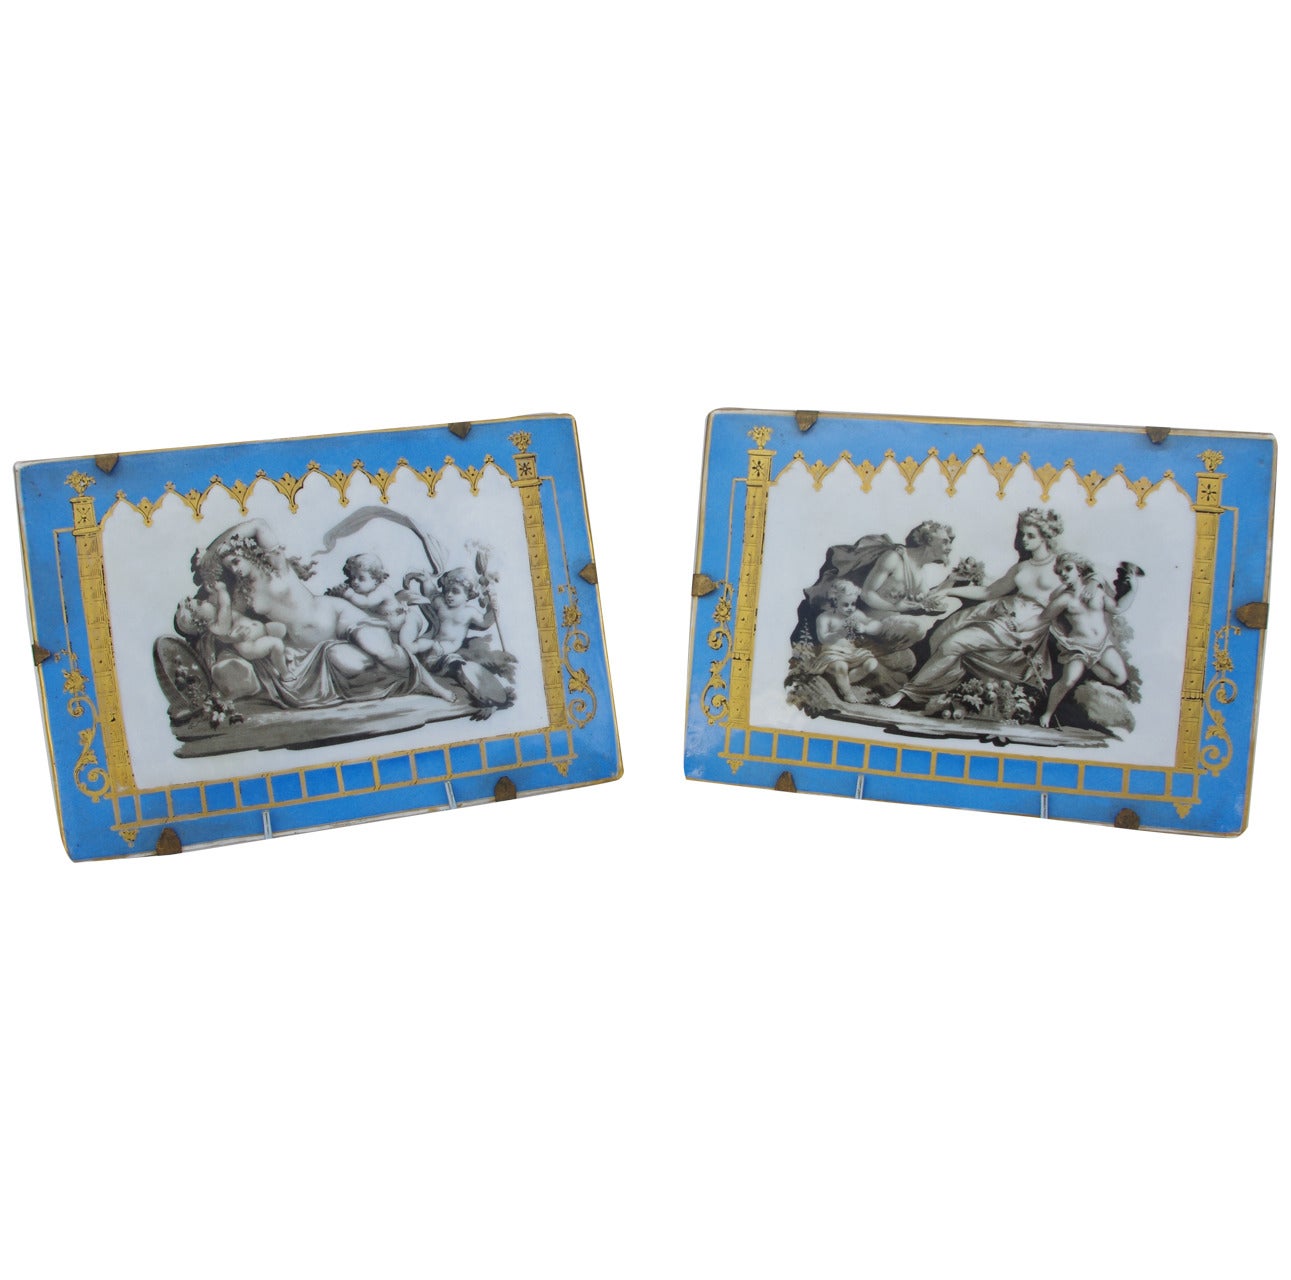 Pair of rectangular porcelain plates with antique scenes, early 19th century